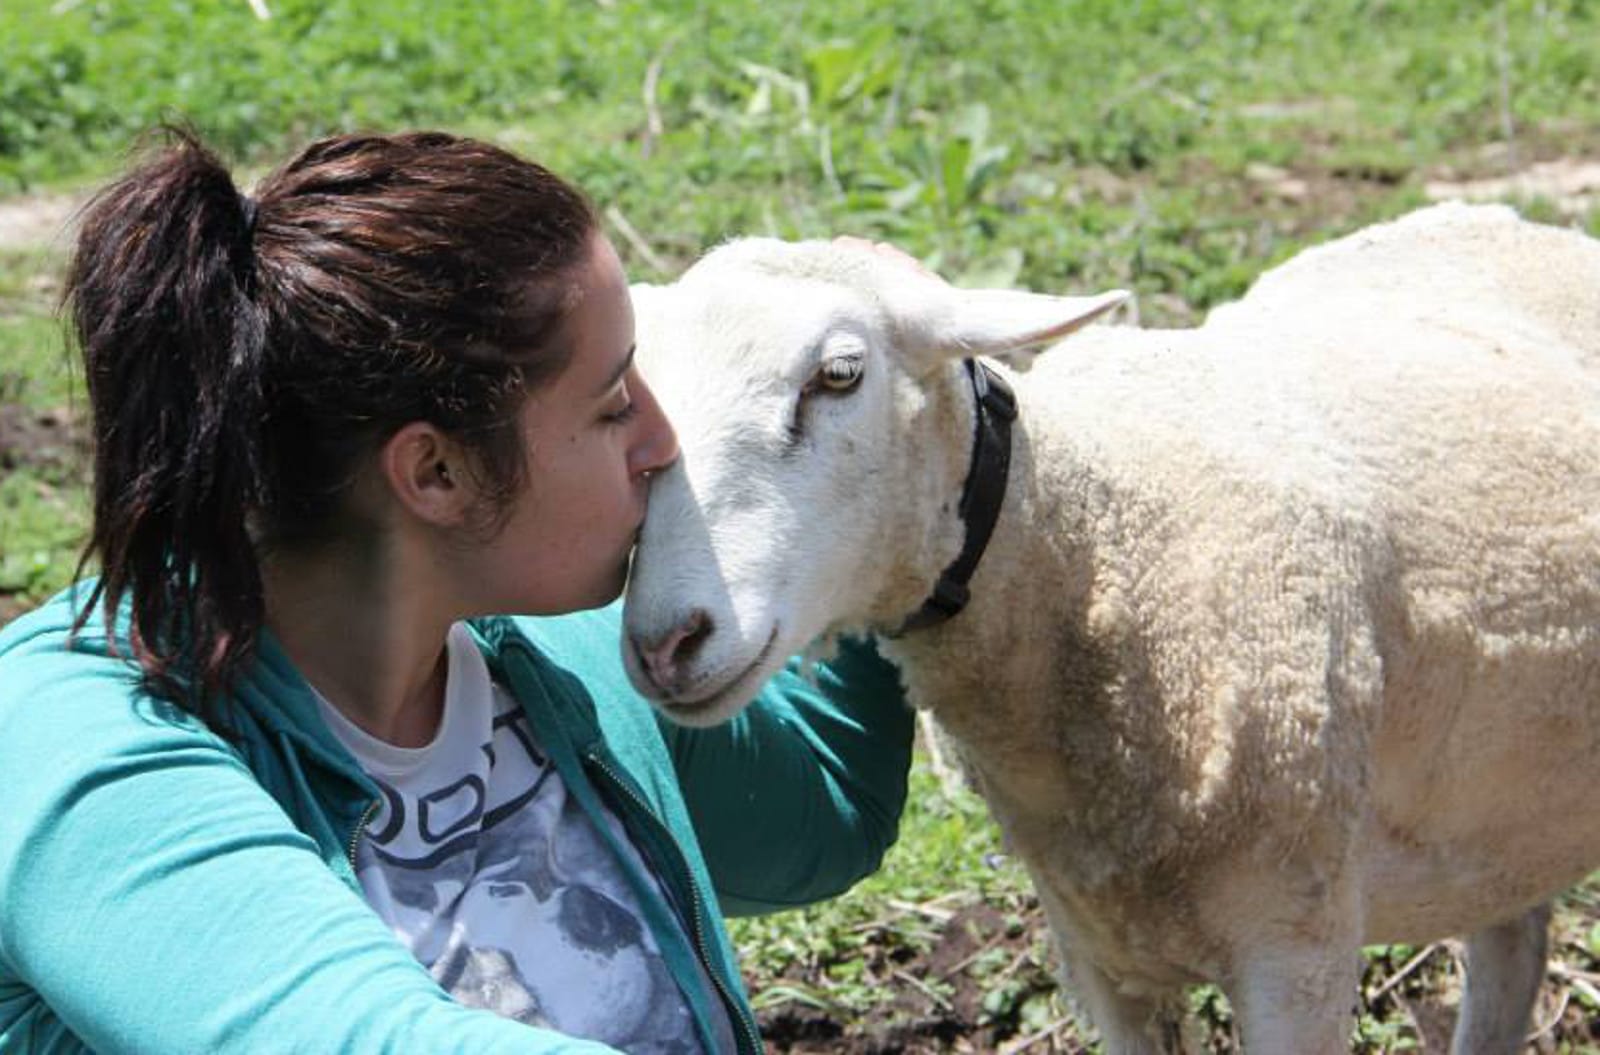 10 Farm Sanctuaries in the U.S. That Are Great For Volunteering